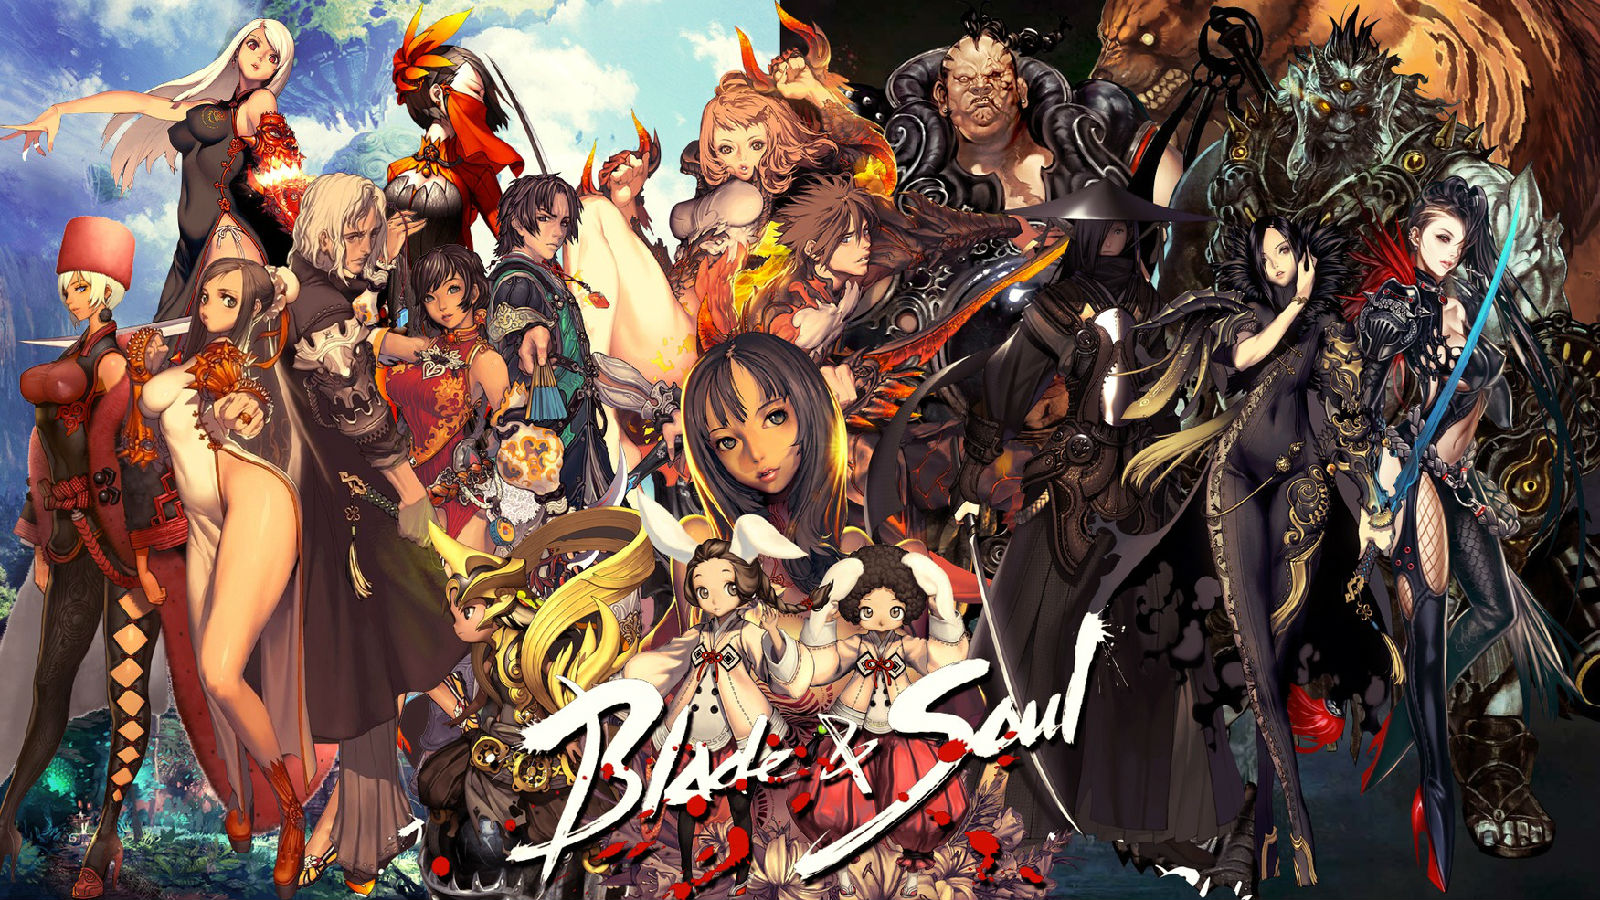 File Name 981250 Best Anime Wallpaper Blade And Soul 981250 Anime